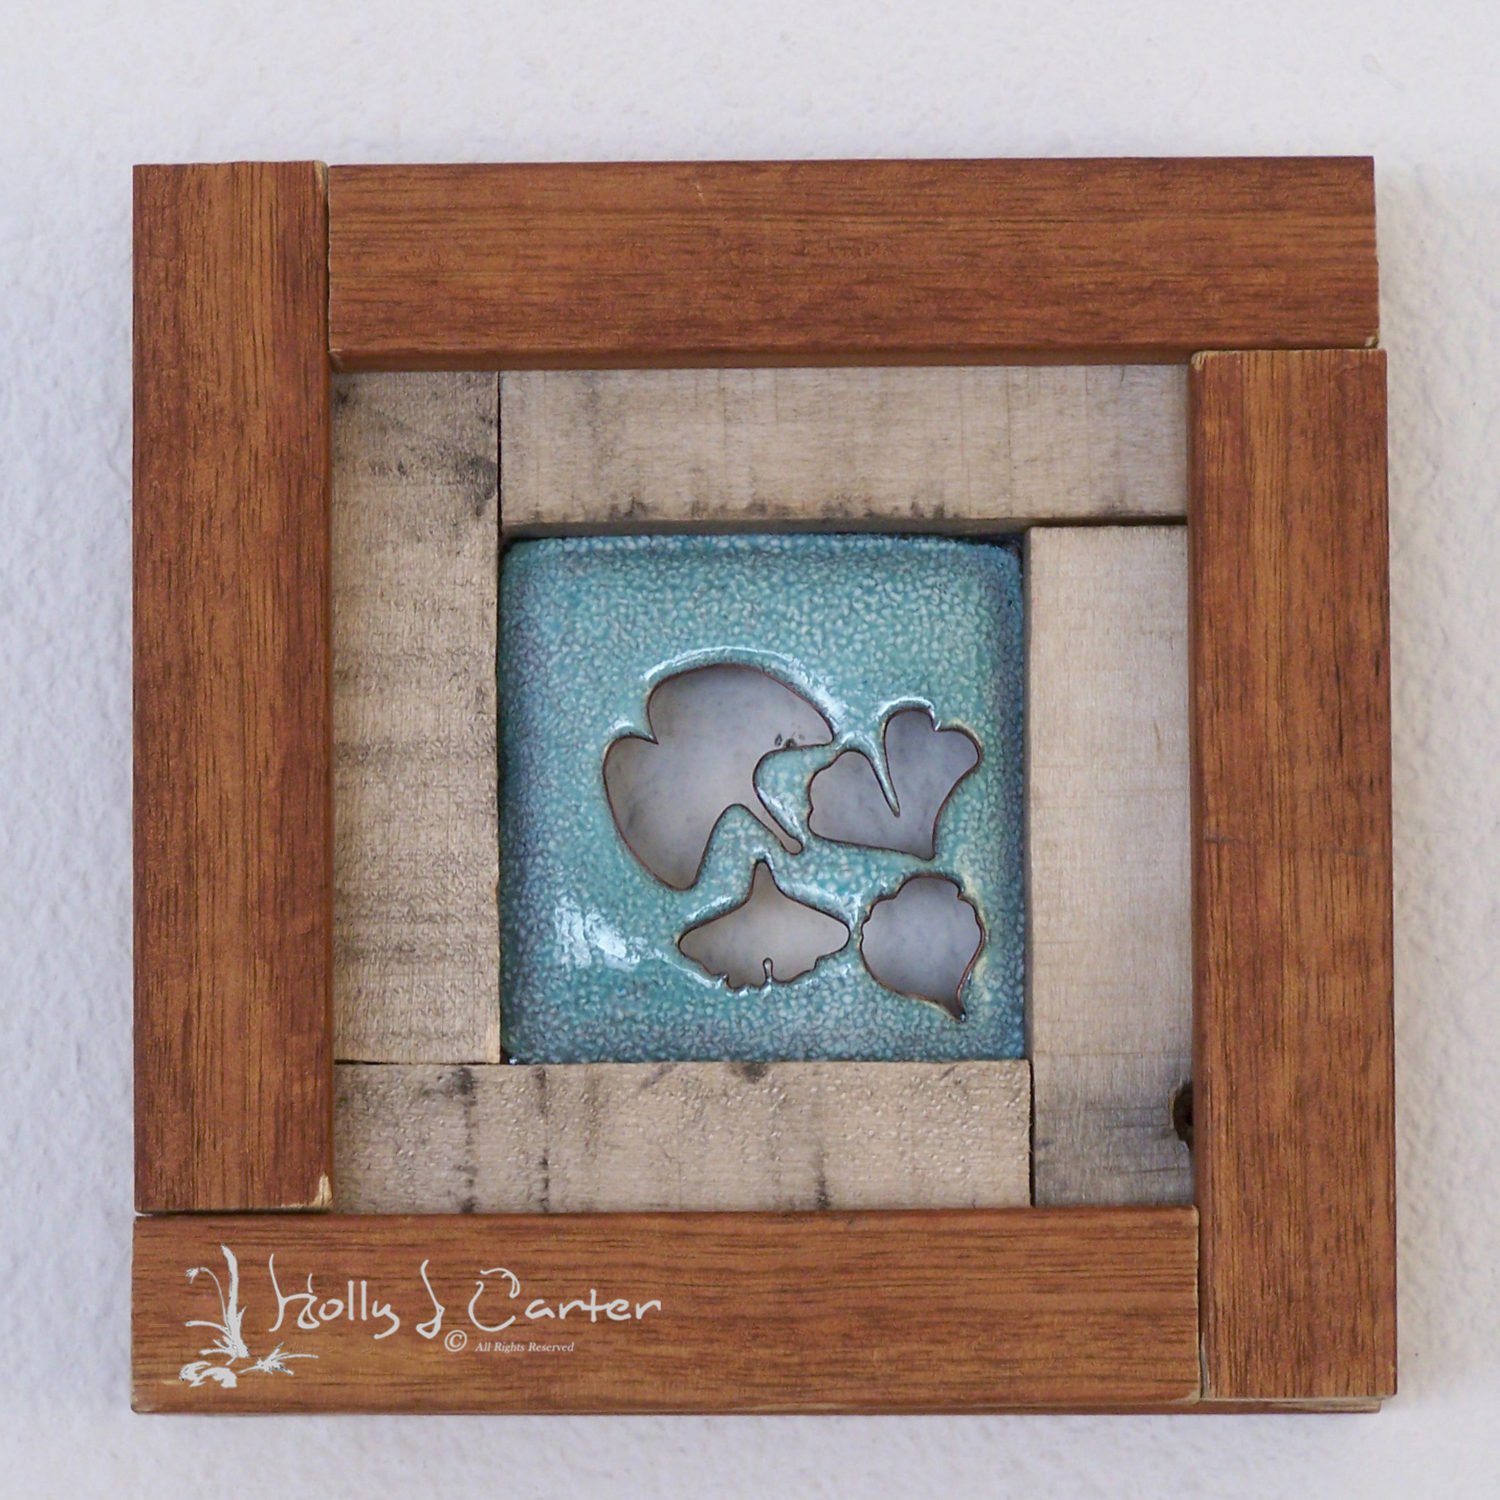 Ginkgo Leaves Vitreous Enameled Framed Wall Pieces by Holly J Carter